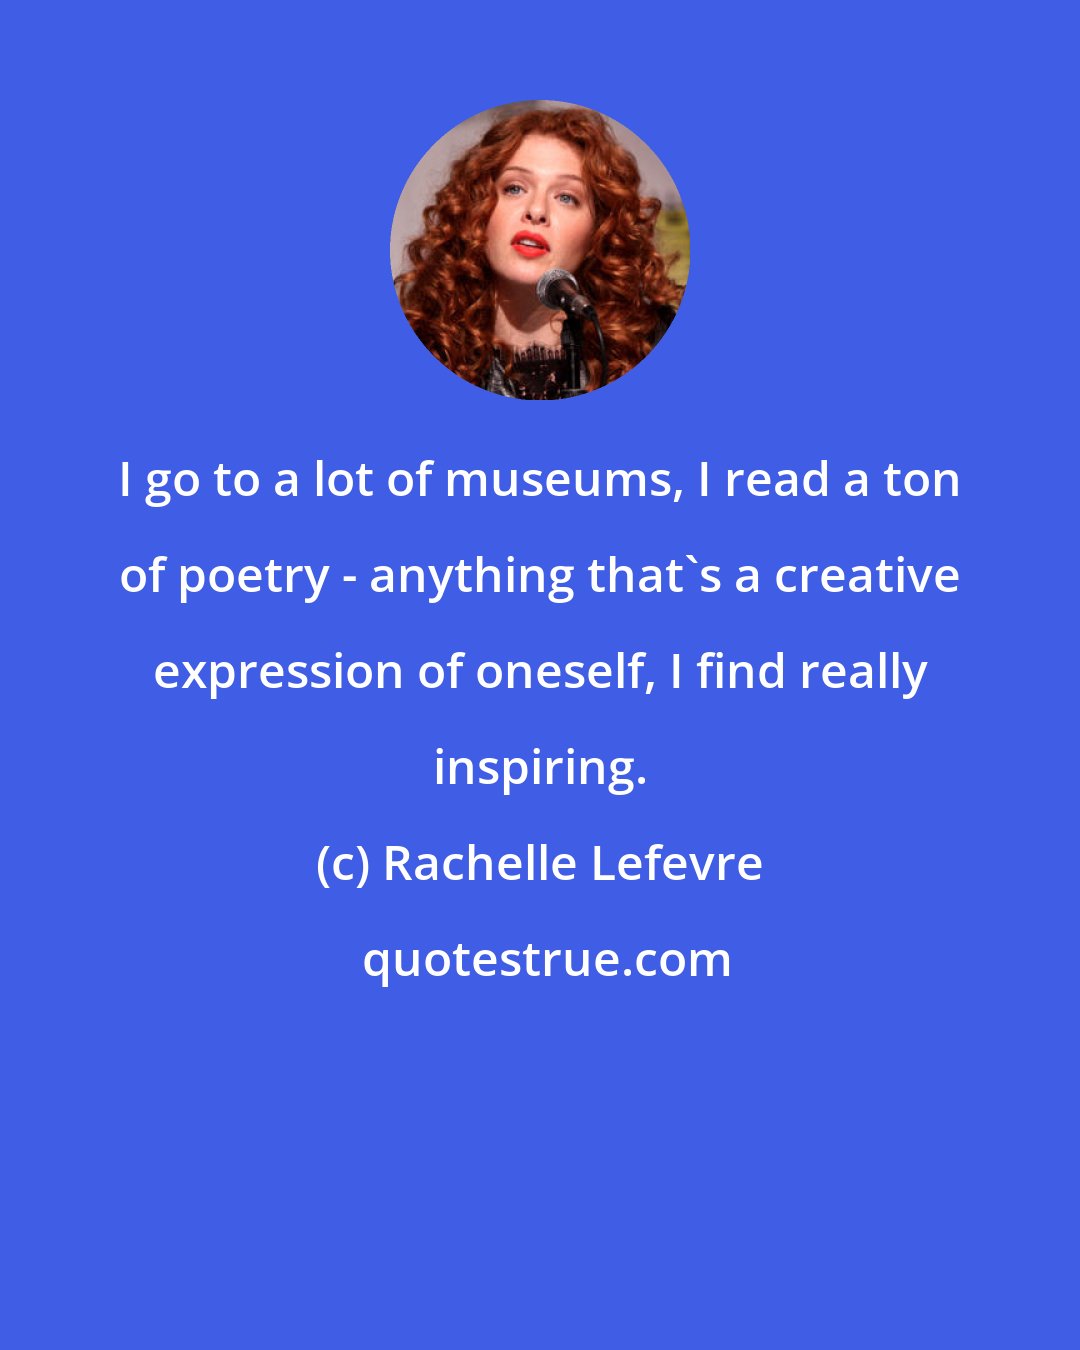 Rachelle Lefevre: I go to a lot of museums, I read a ton of poetry - anything that's a creative expression of oneself, I find really inspiring.